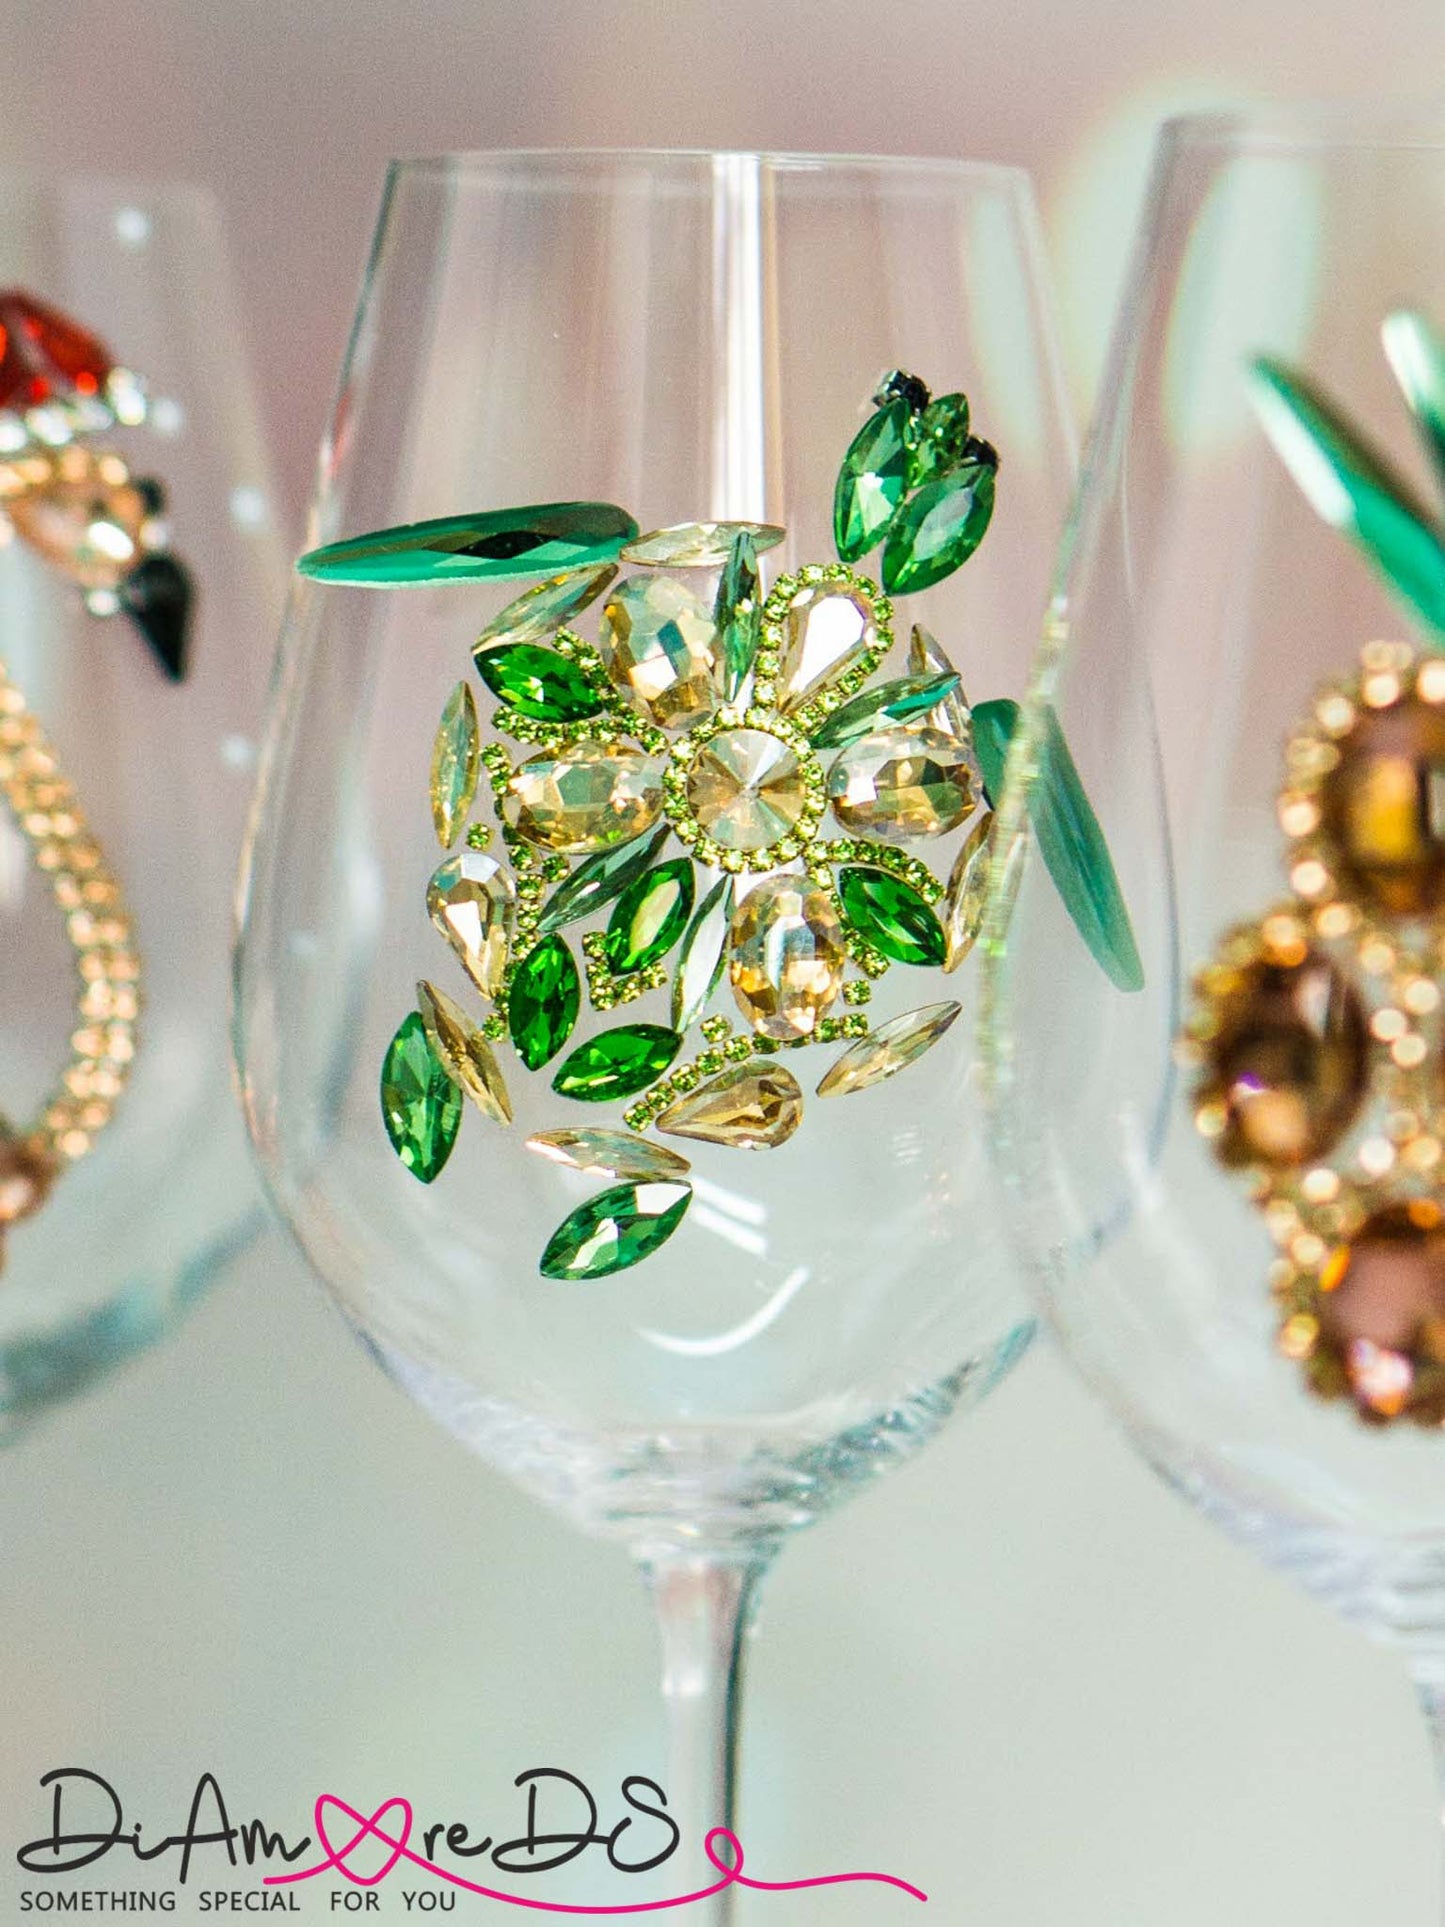 Artisanal wine glass with a sea turtle motif, handcrafted with green and gold crystals for a luxurious feel.